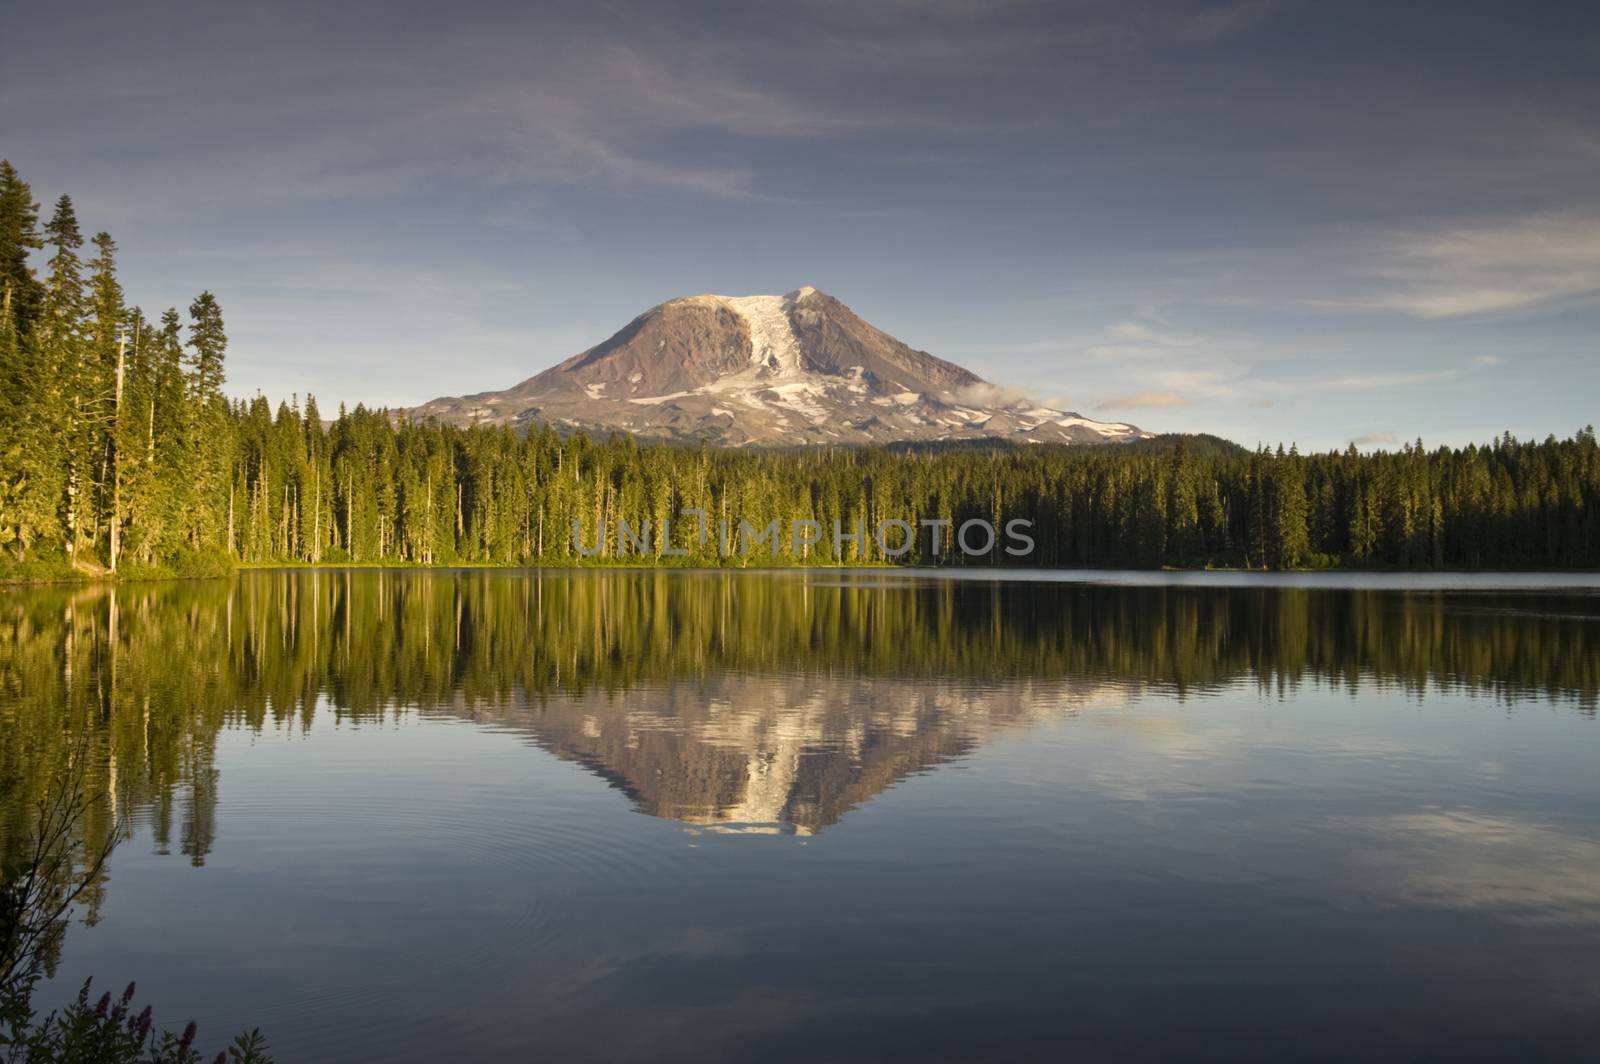 Mount Adams USA by ChrisBoswell